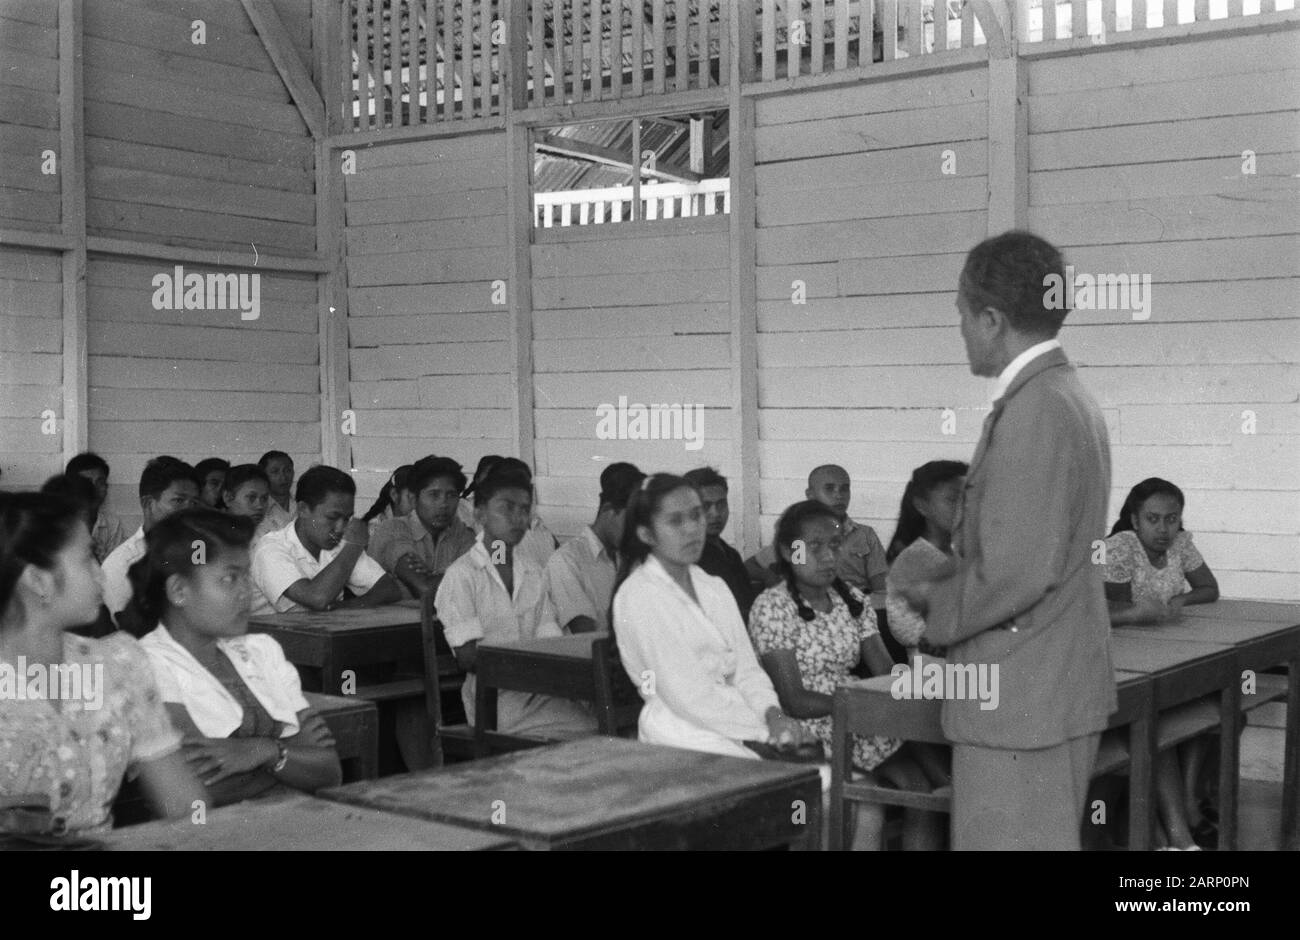 Surroundings Fort de Kock  An Indonesian man addresses high school children in a wooden room. Date: 14 February 1949 Location: Indonesia, Dutch East Indies, Sumatra Stock Photo